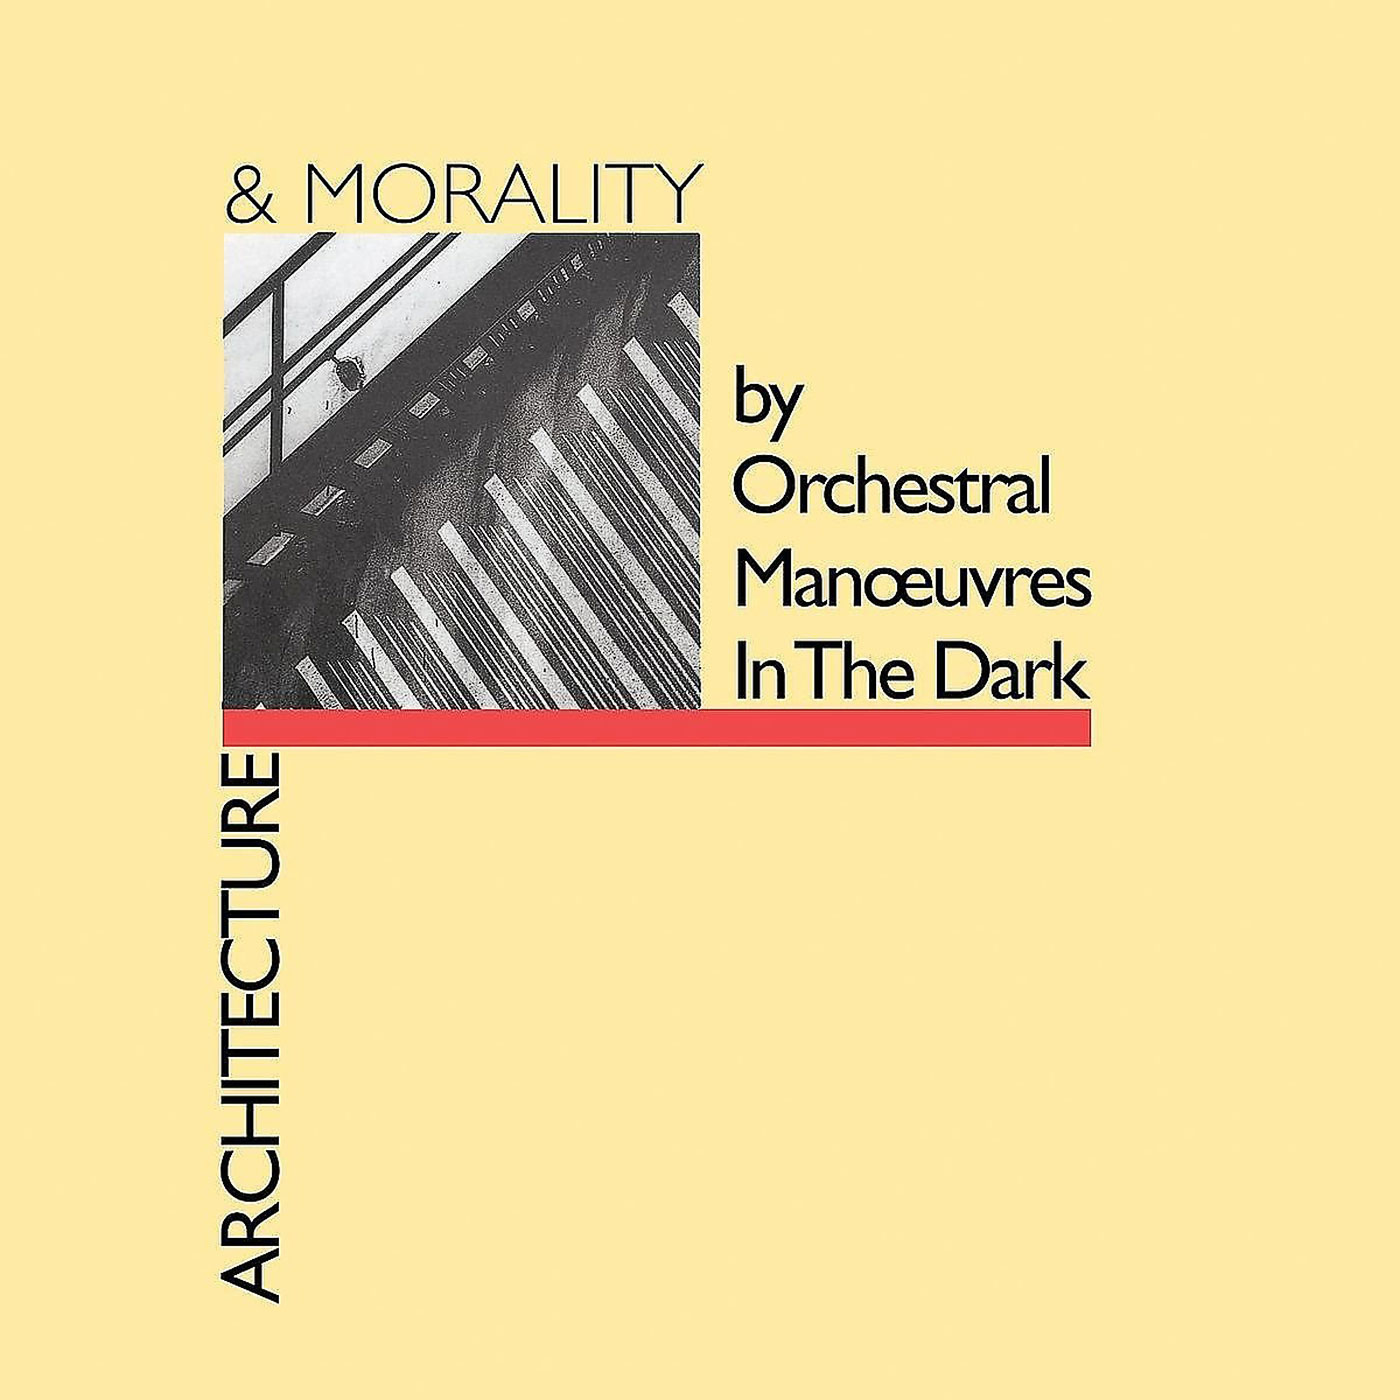 484 Orchestral Manoeuvres in the Dark – Architecture & Morality